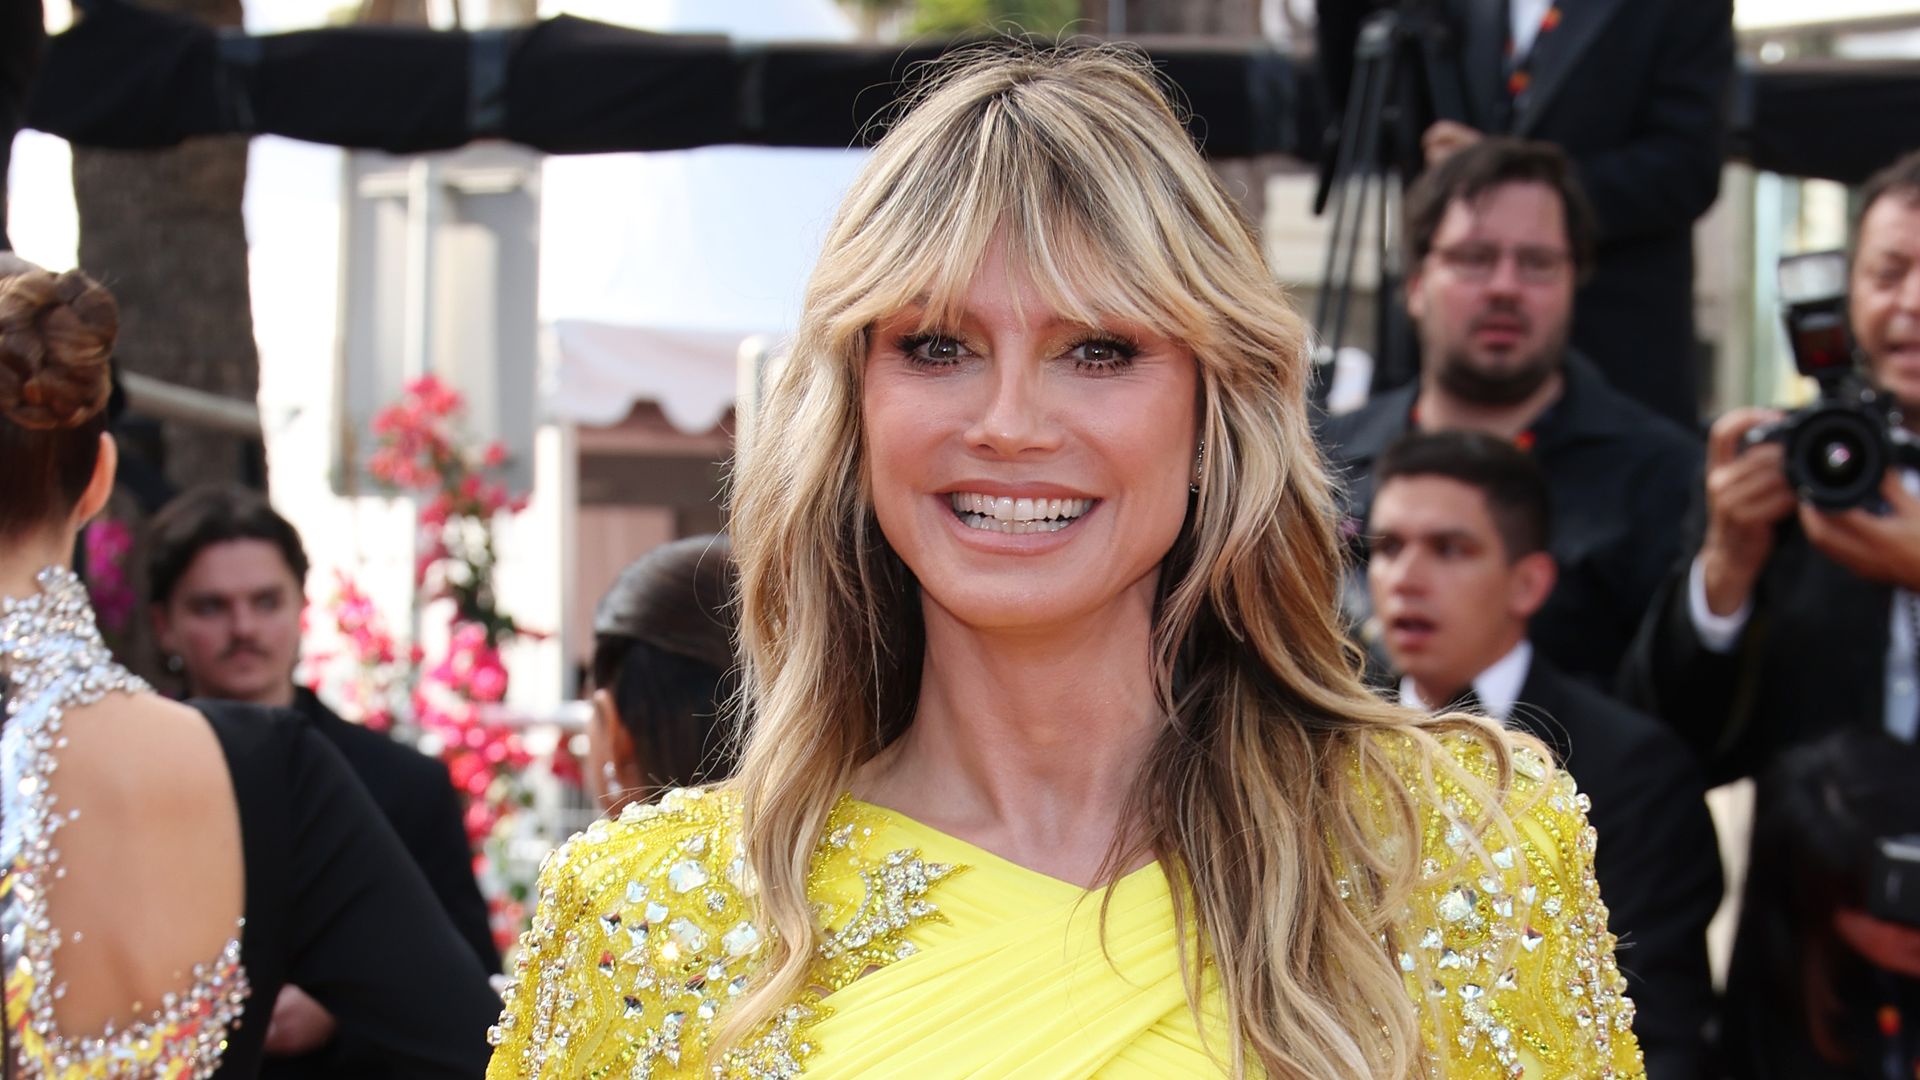 Heidi Klum attends the "La Passion De Dodin Bouffant" red carpet during the 76th annual Cannes film festival at Palais des Festivals on May 24, 2023 in Cannes, France